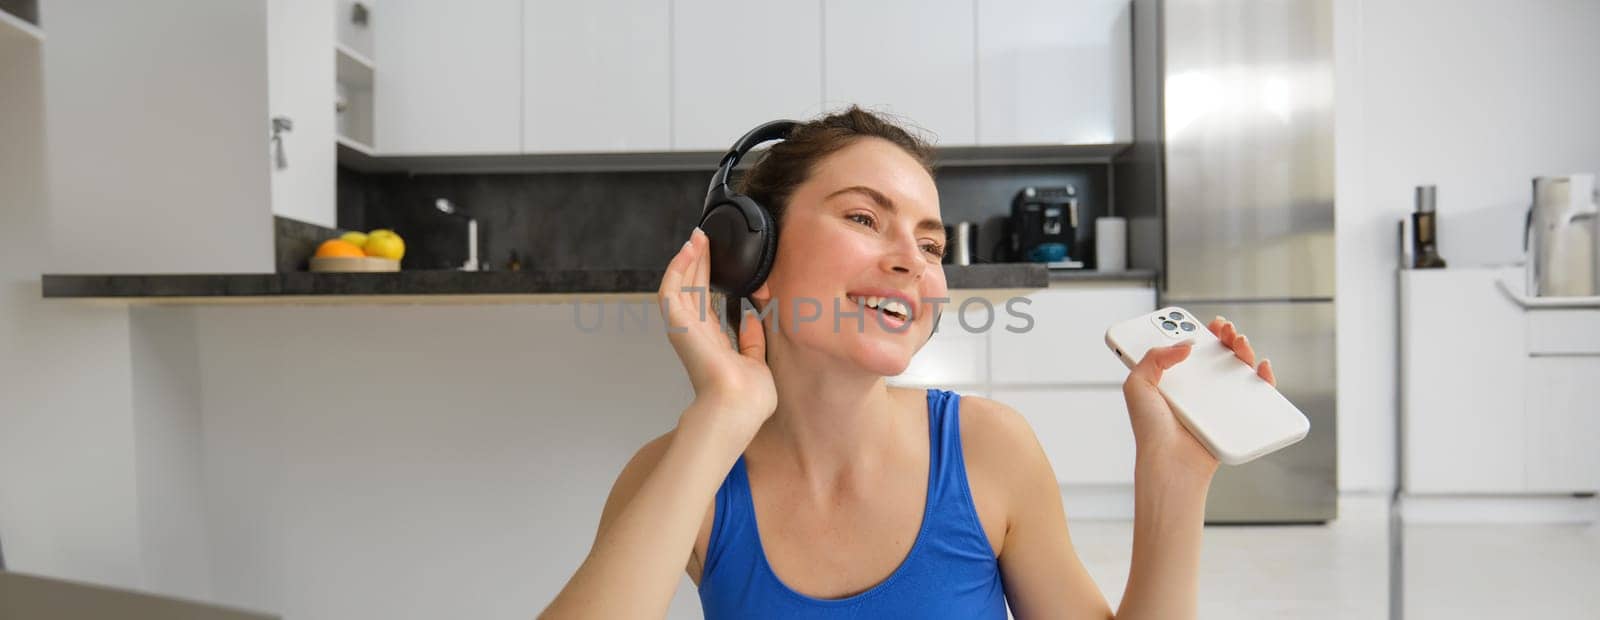 Happiness, sports and wellbeing. Young woman dancing in headphones, holding smartphone, doing workout at home, fitness training inside her house.